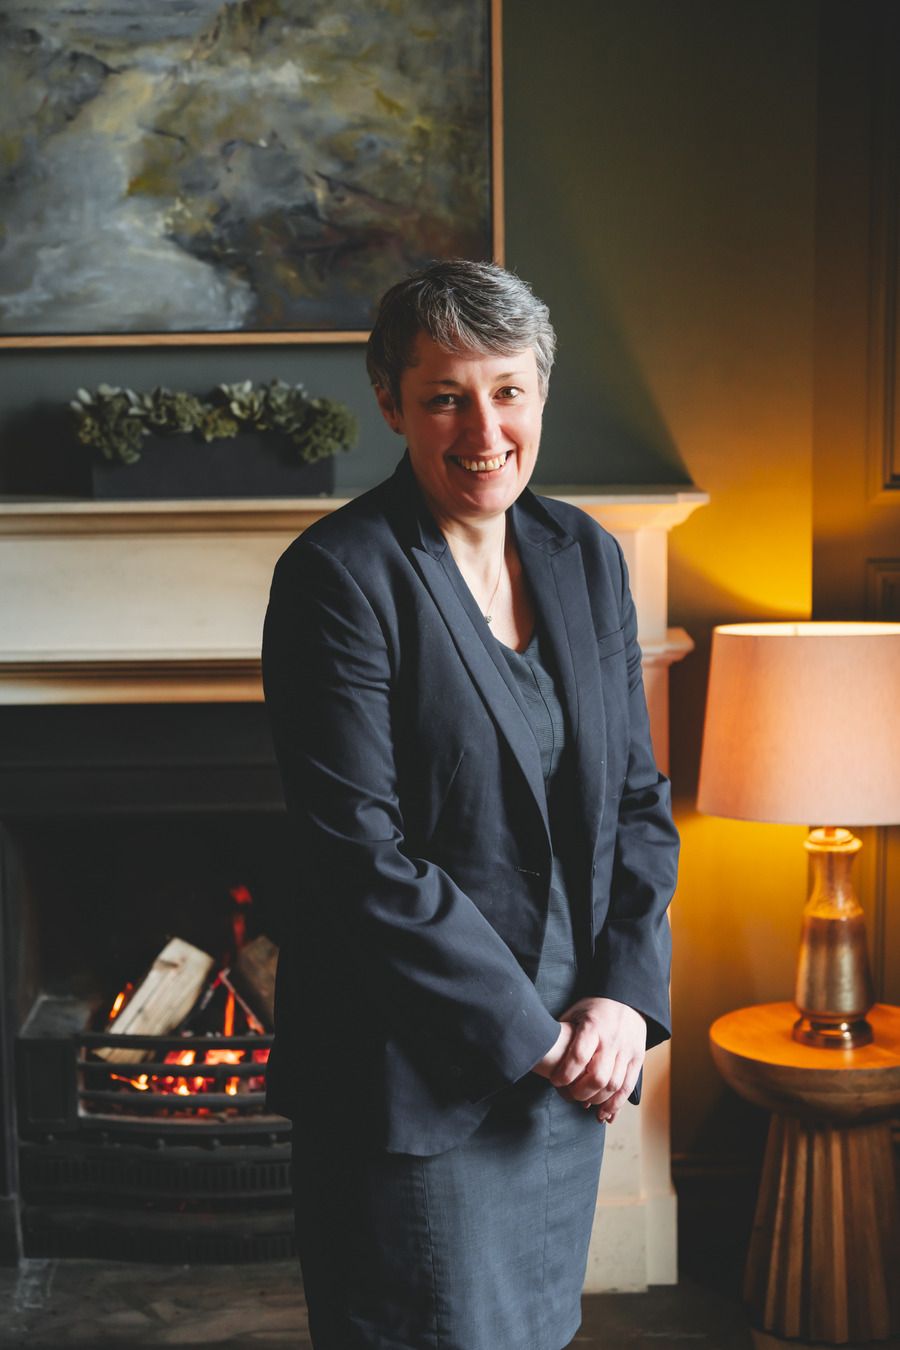 Maria Quigley, General Manager at the Borrowdale Hotel